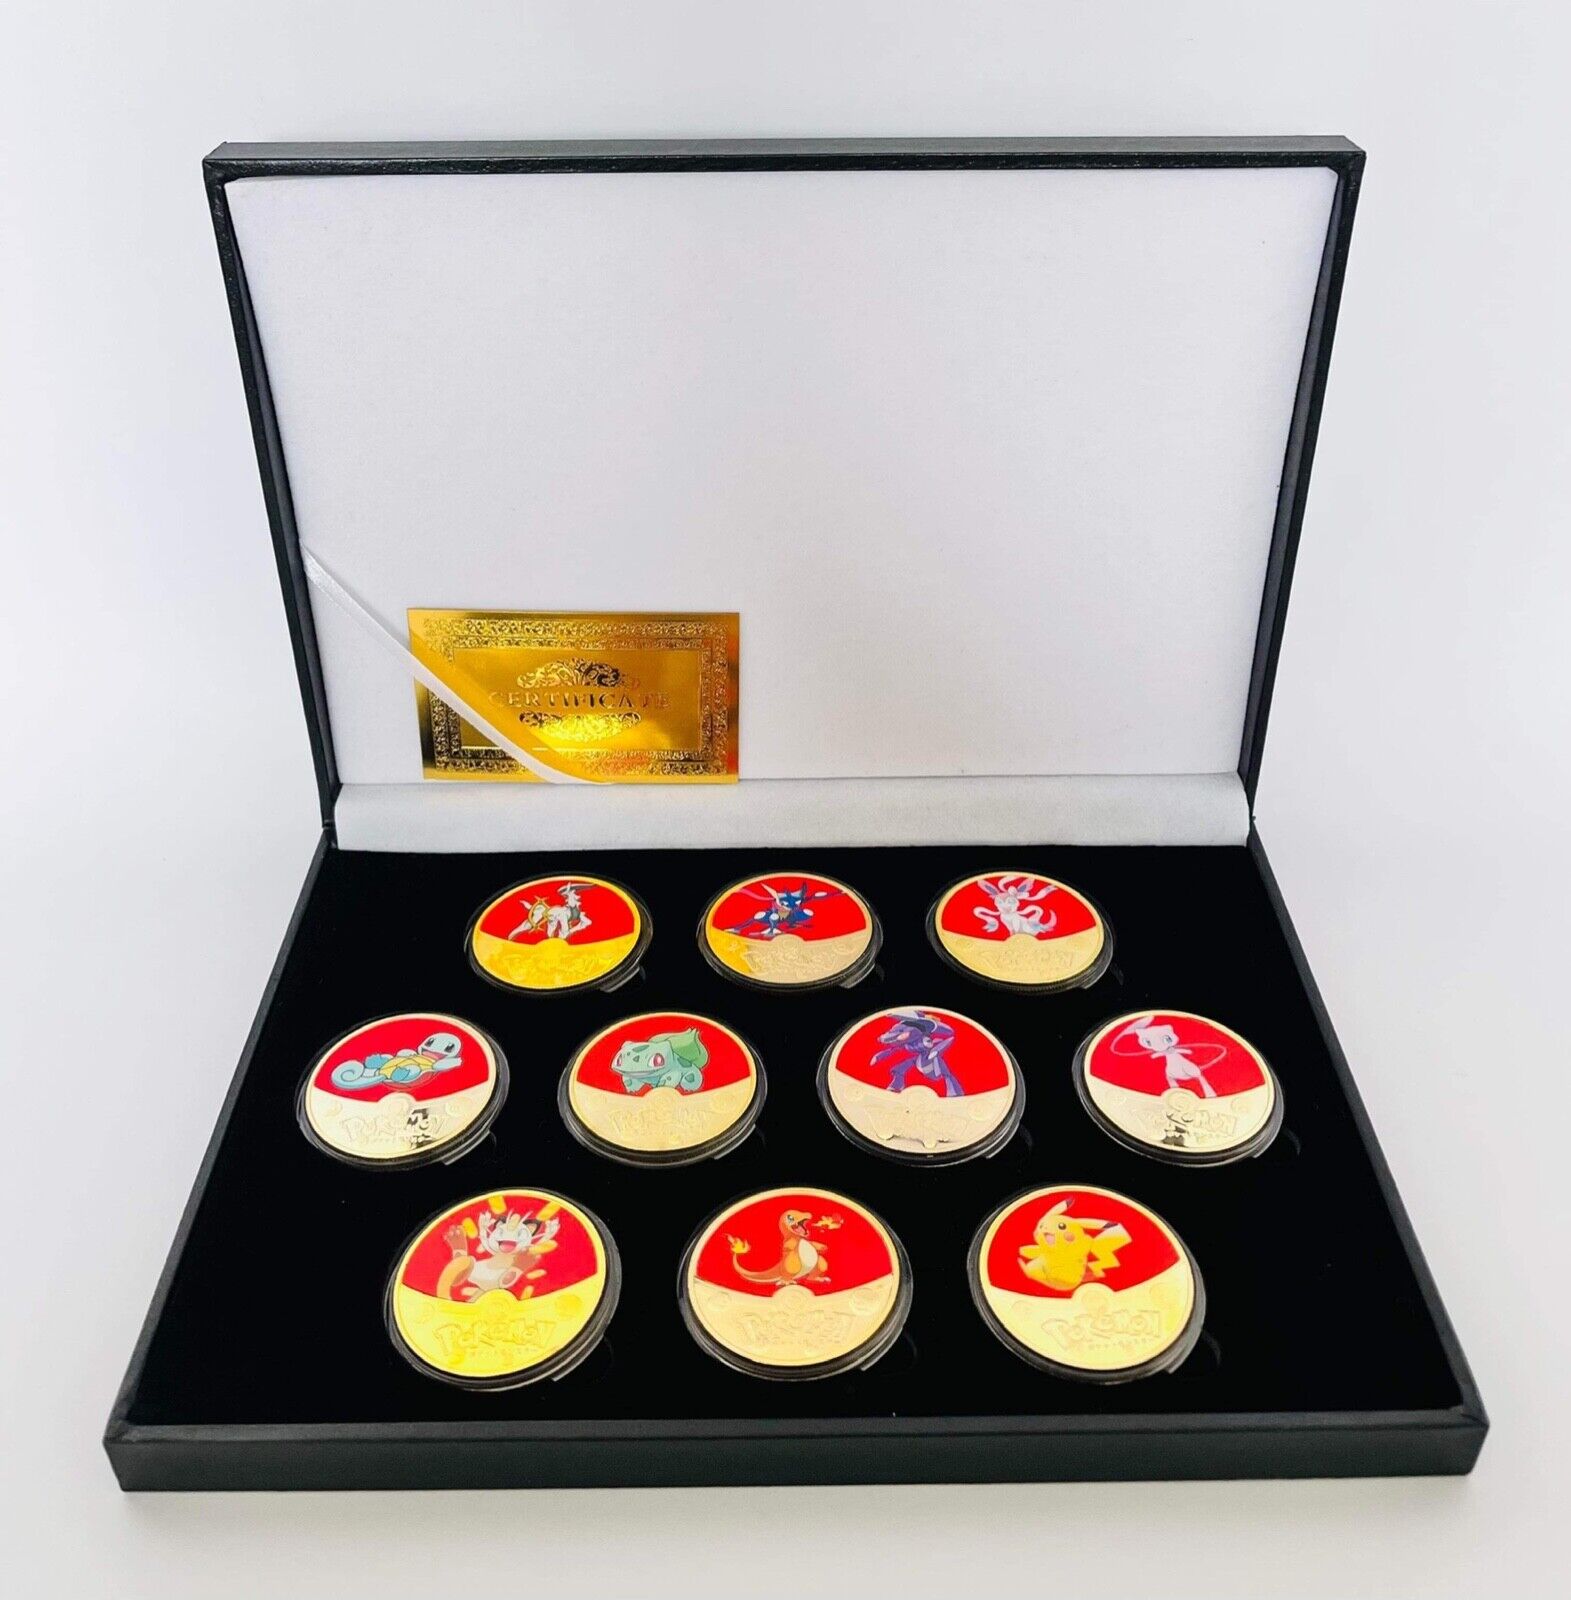 x10 Pokemon Rare Gold Plated Collectible Coins Set In A Black Display Box